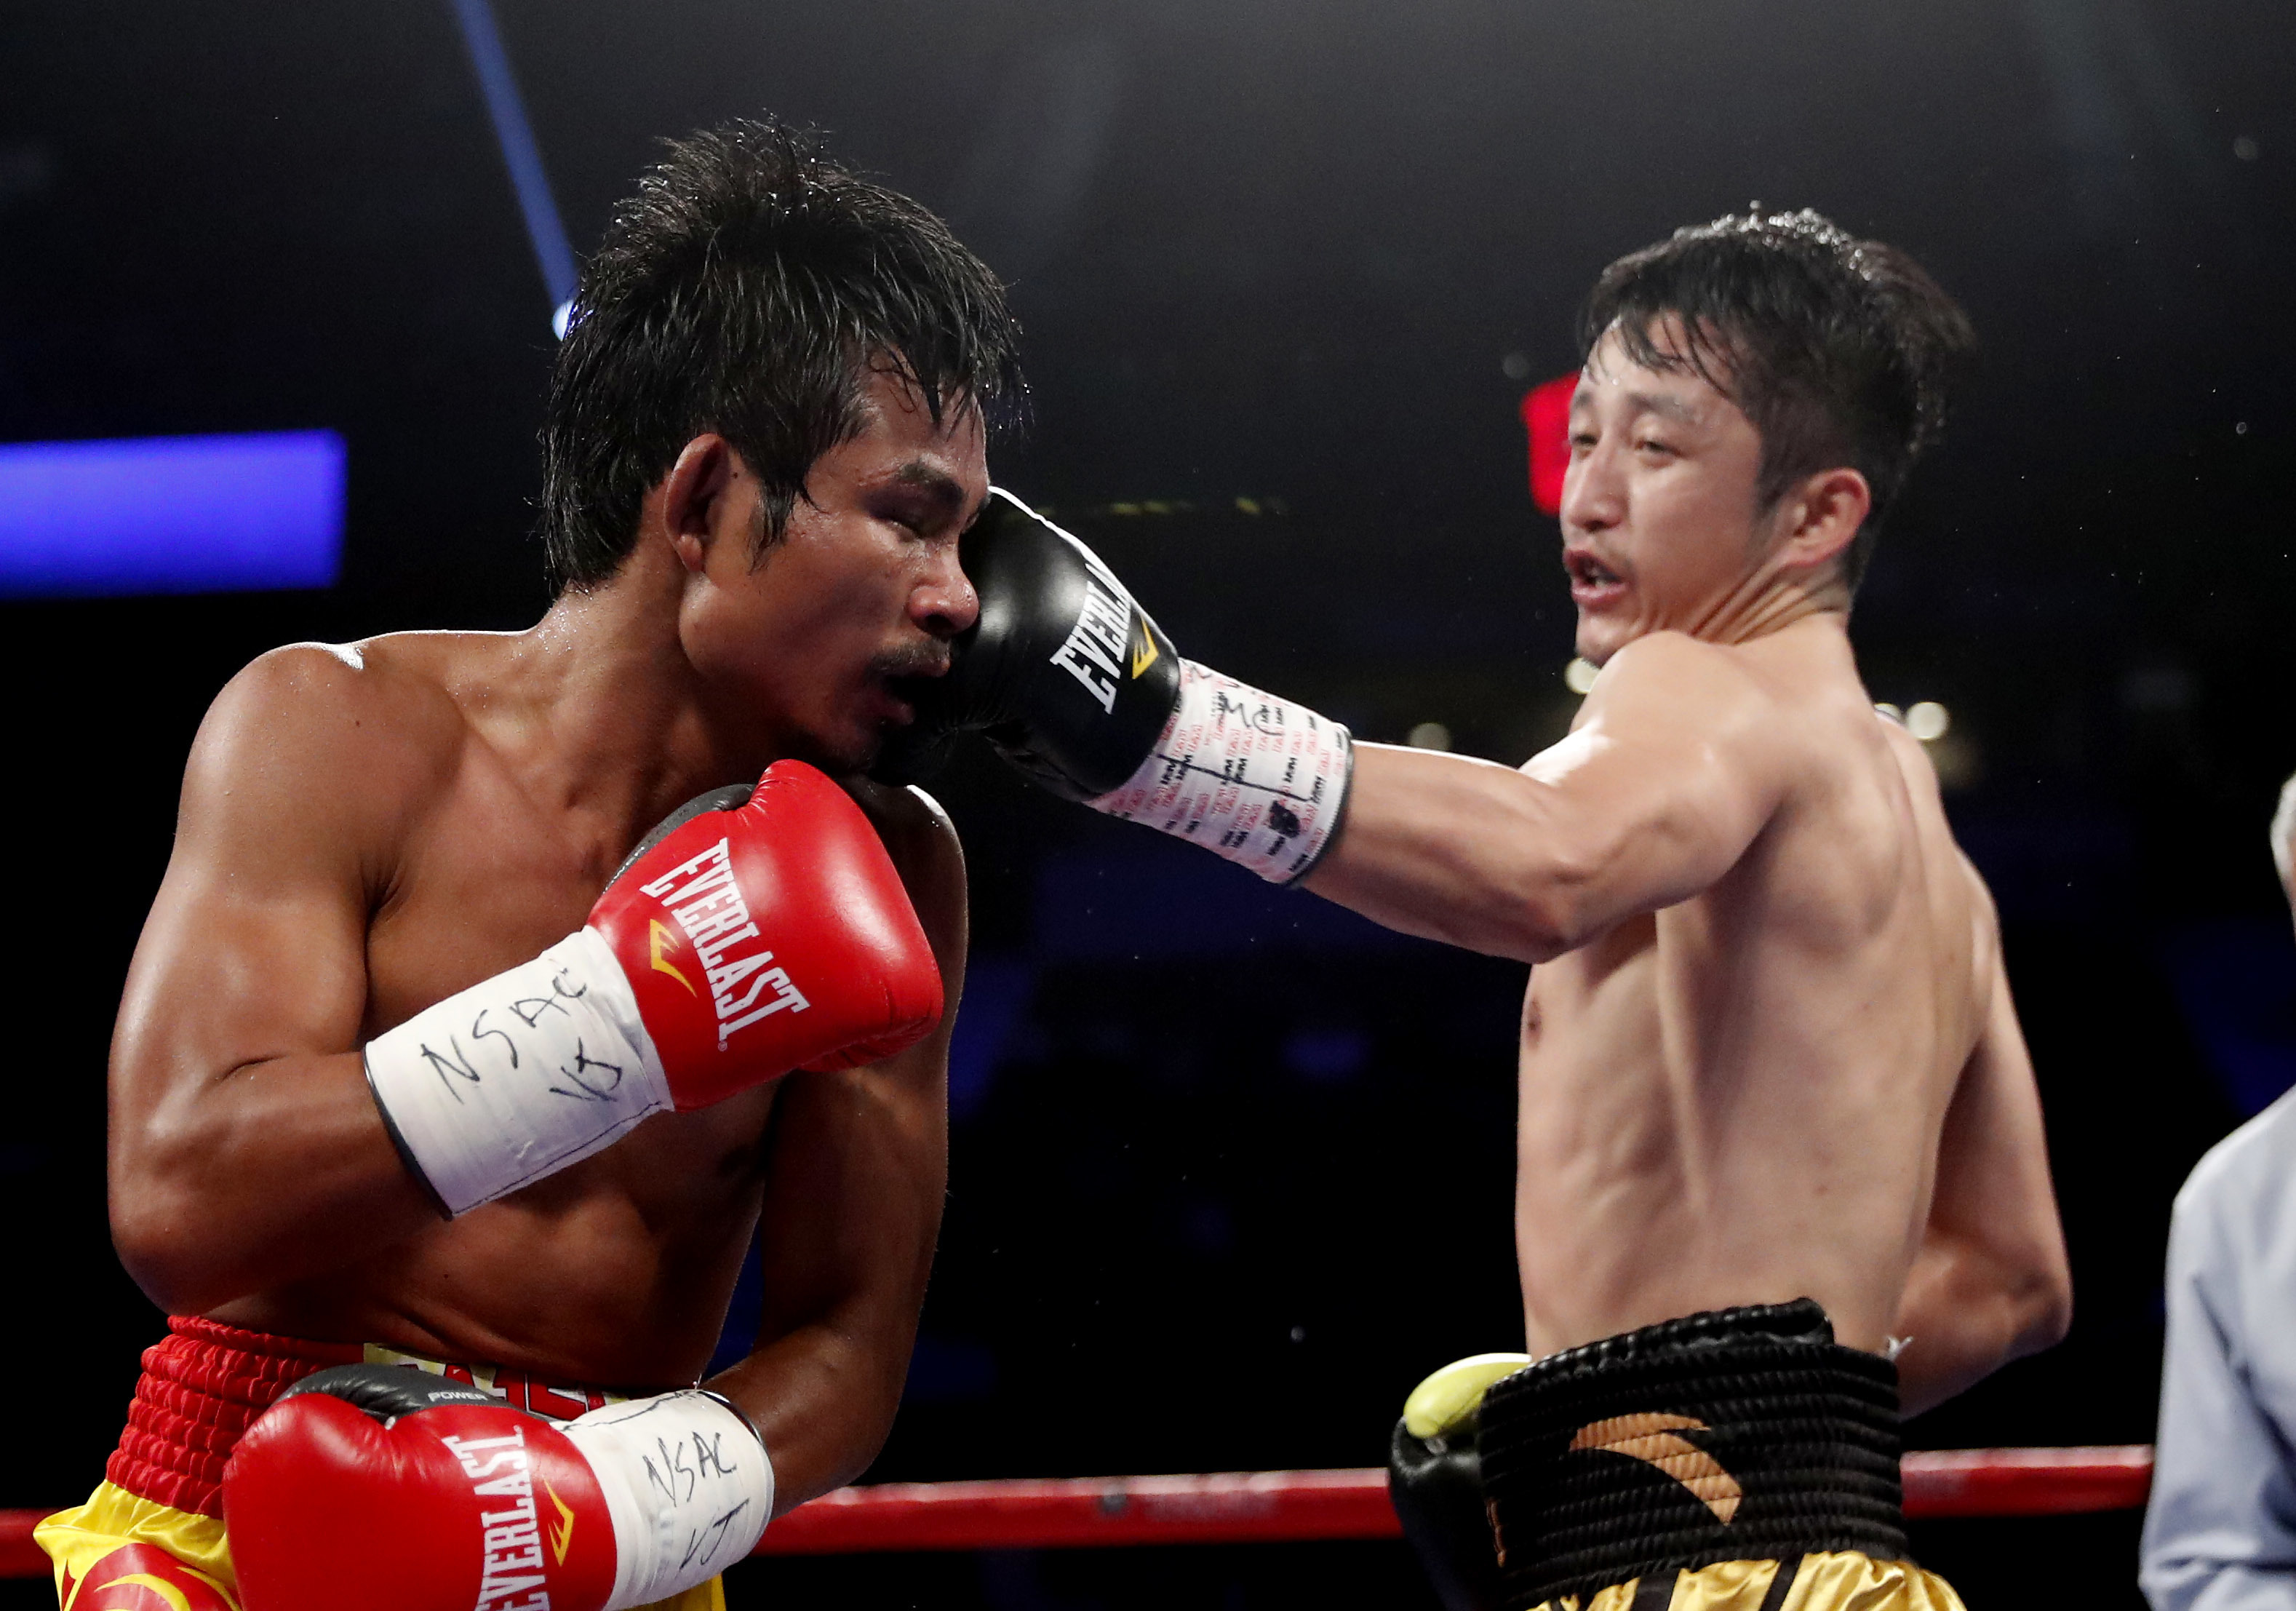 Zou Shiming, of China, right punches Prasitak Phaprom, of Thailand, during their WBO flyweight title boxing match on Saturday, Nov. 5, 2016, in Las Vegas. Zou won by unanimous decision. (AP Photo/Isaac Brekken)